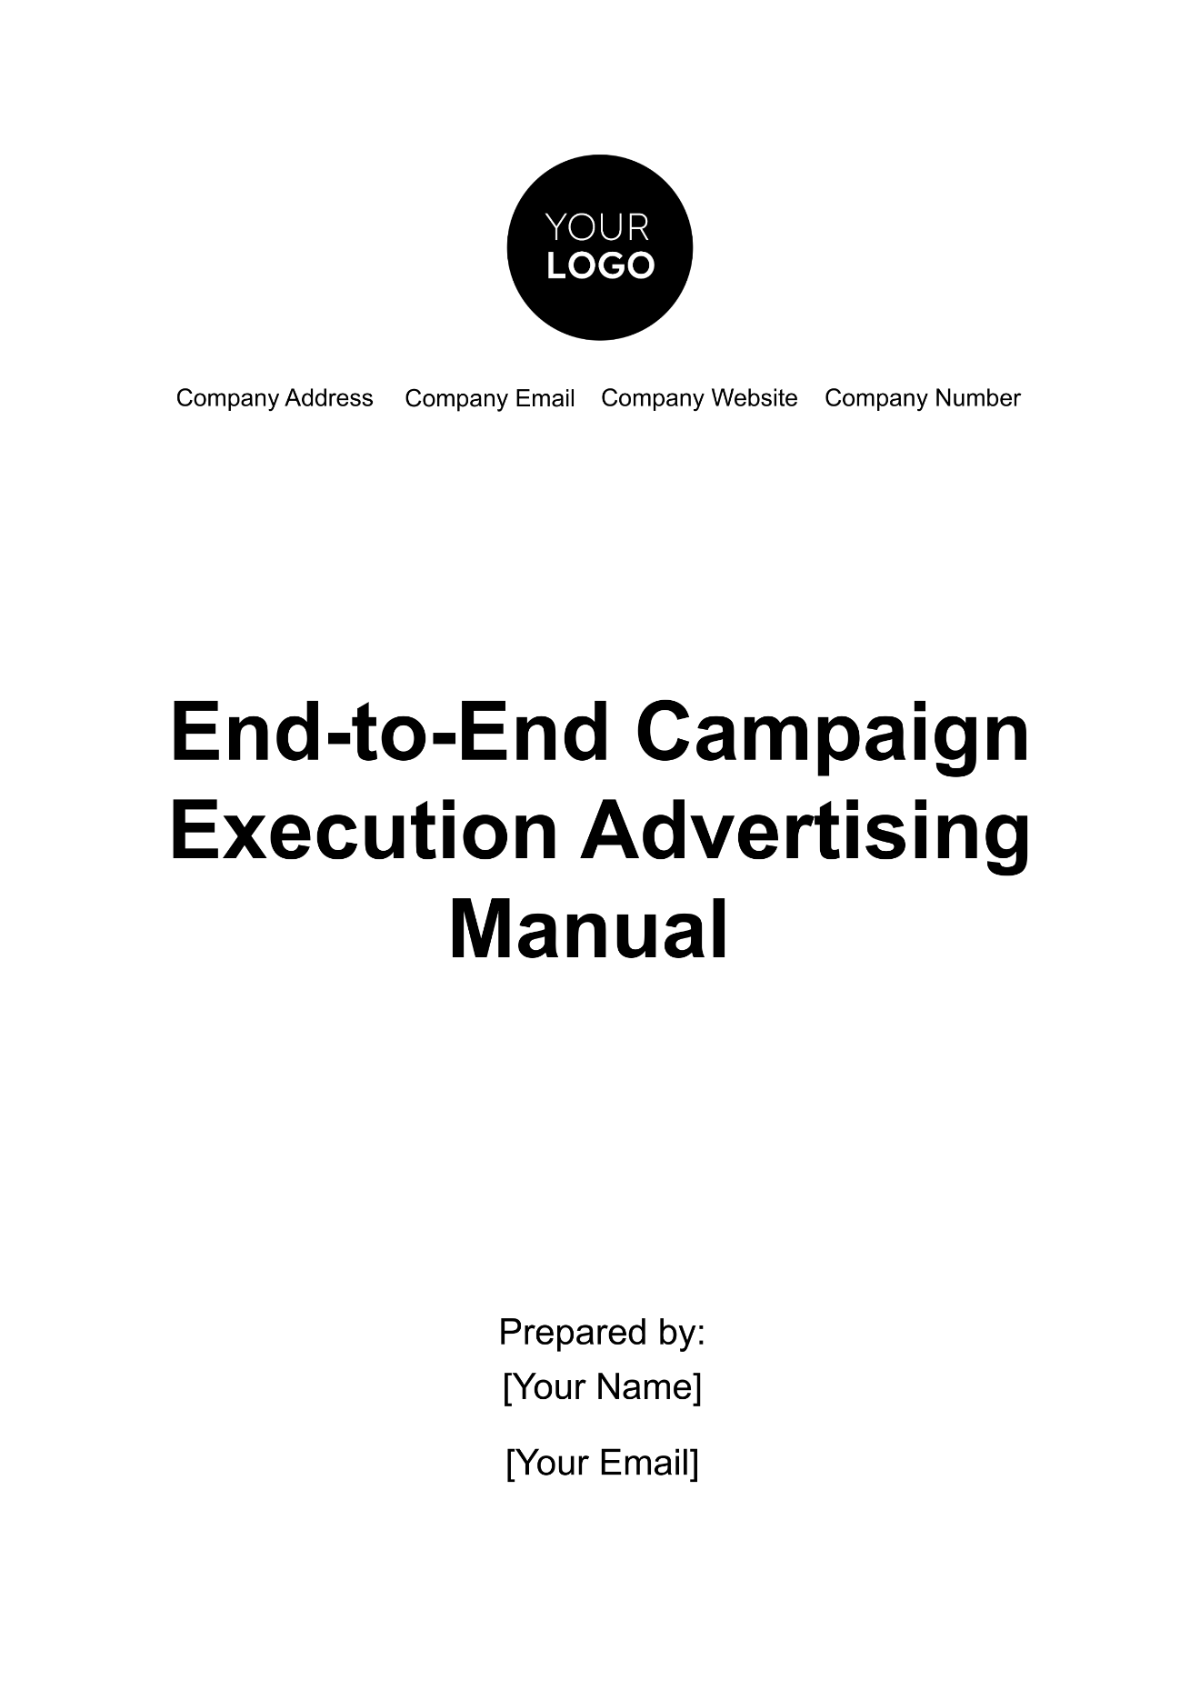 Free End-to-End Campaign Execution Advertising Manual Template